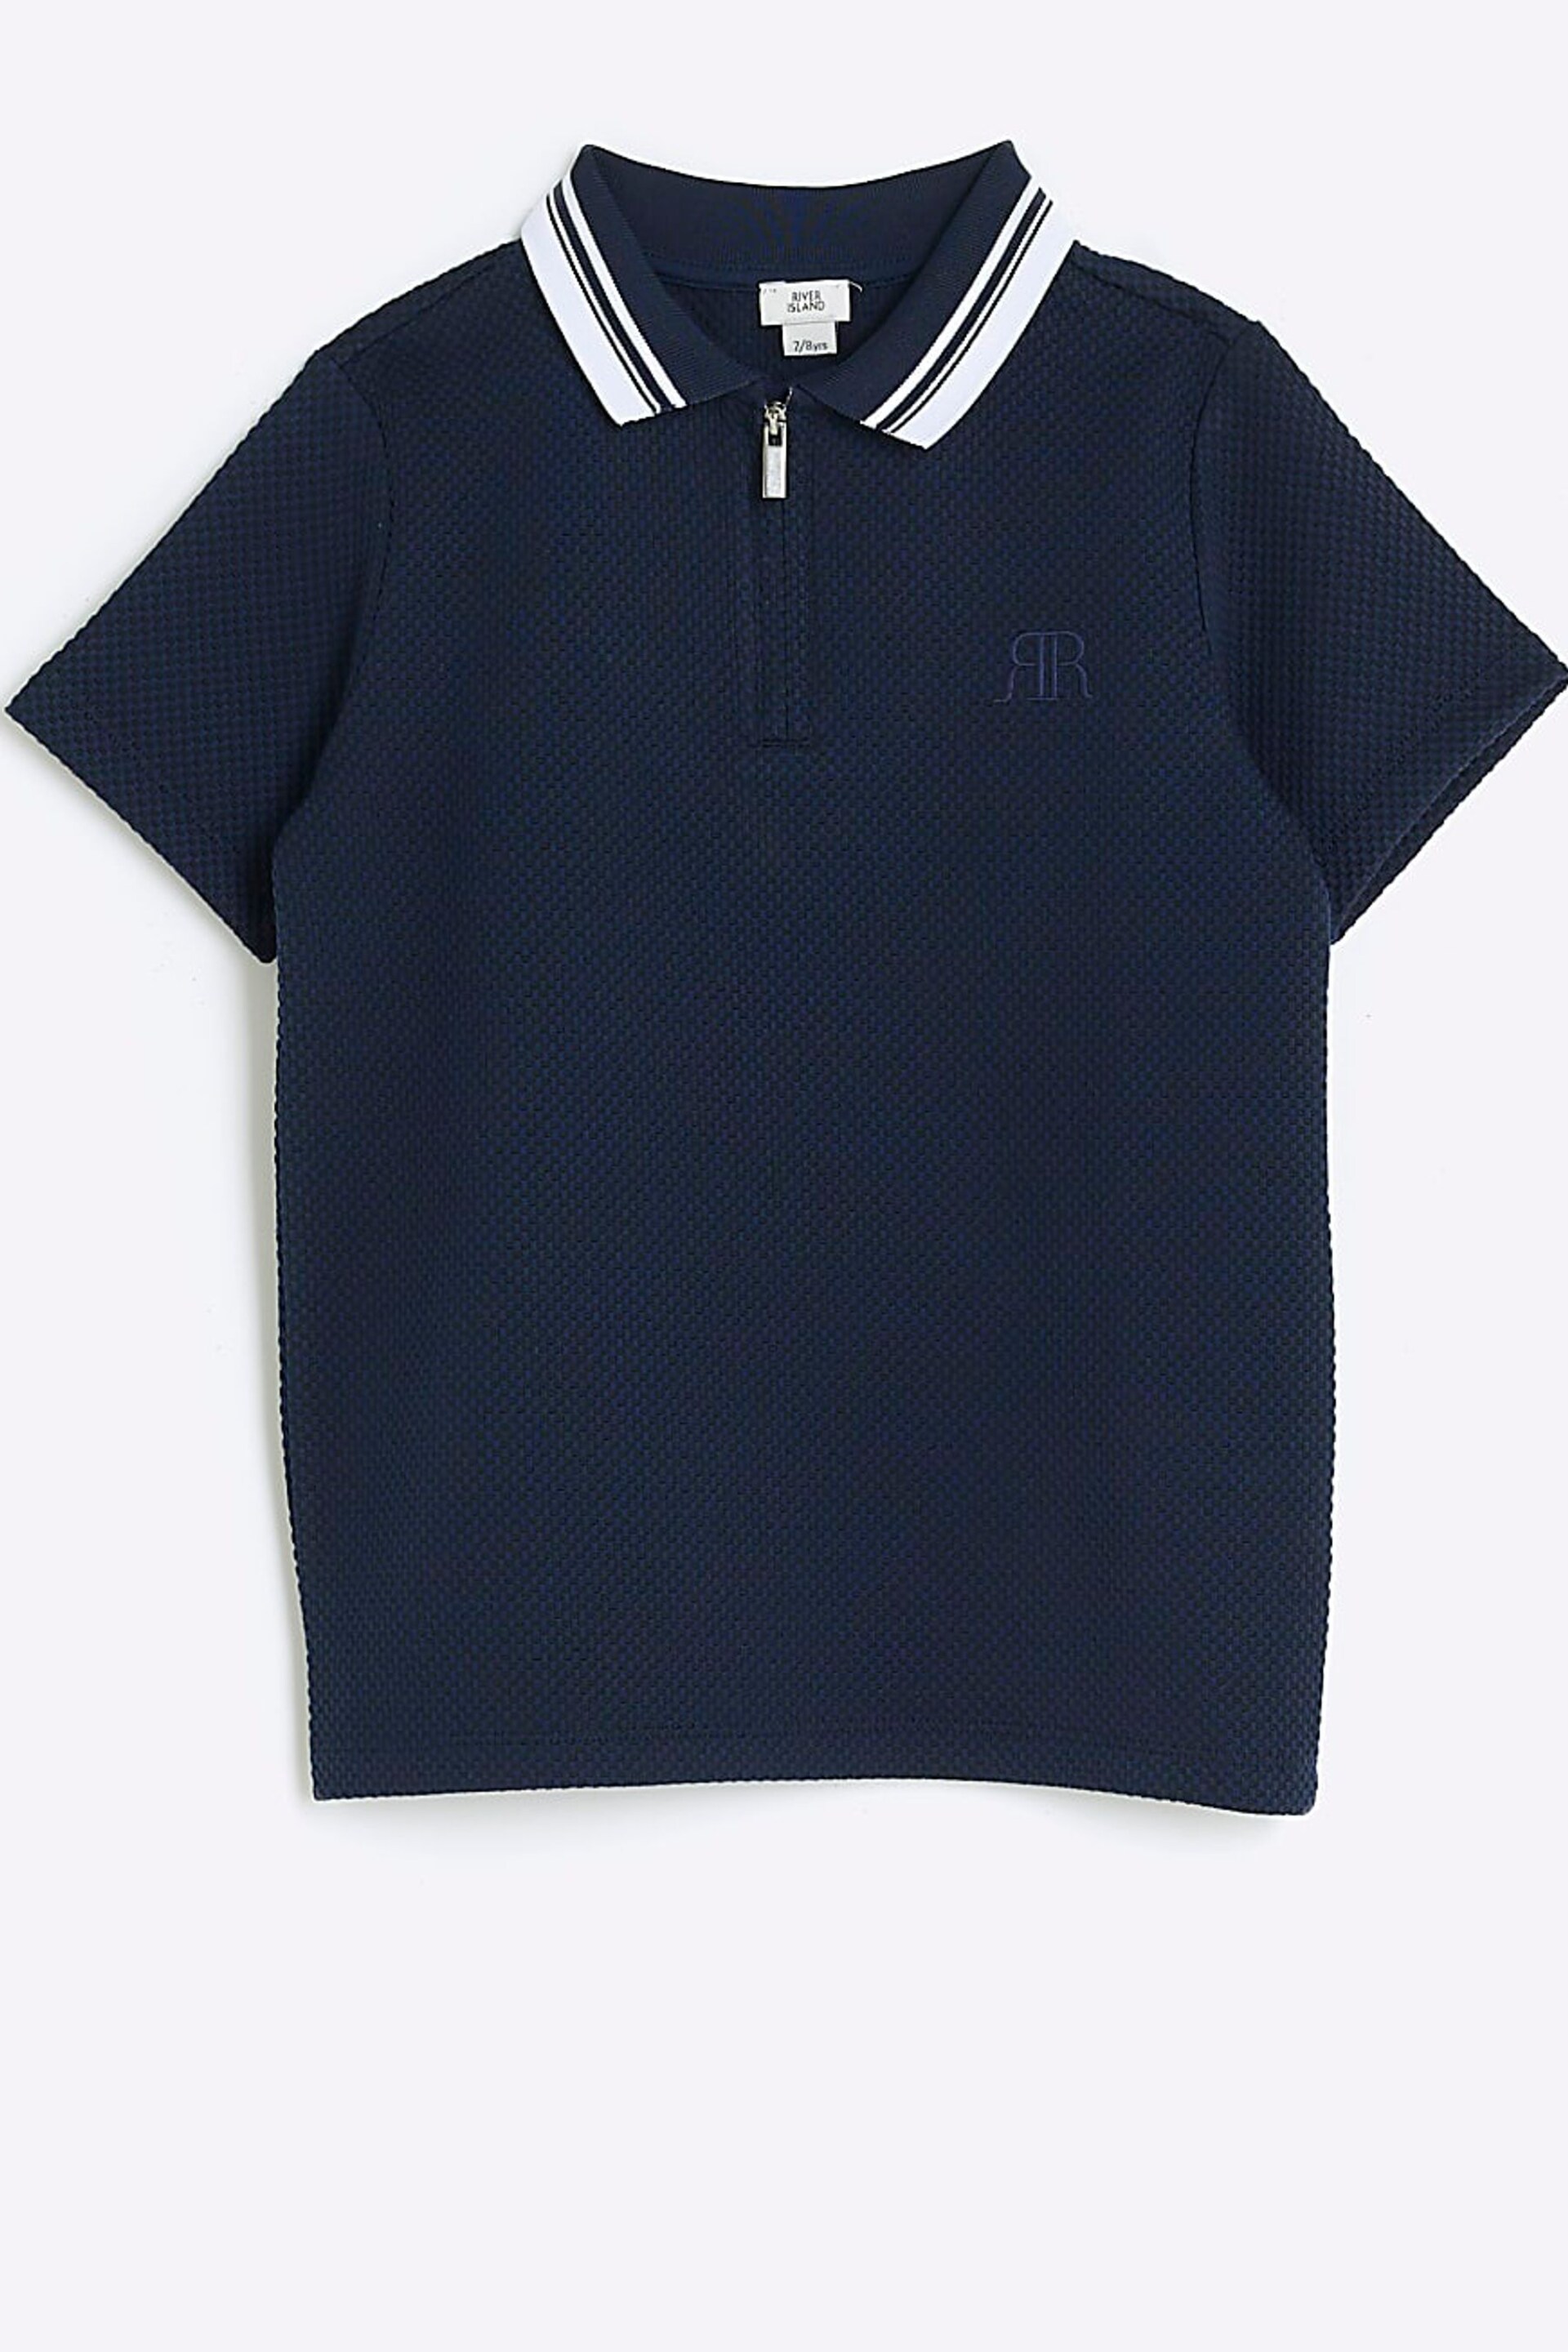 River Island Blue Boys Textured Tipped Polo Shirt - Image 1 of 4